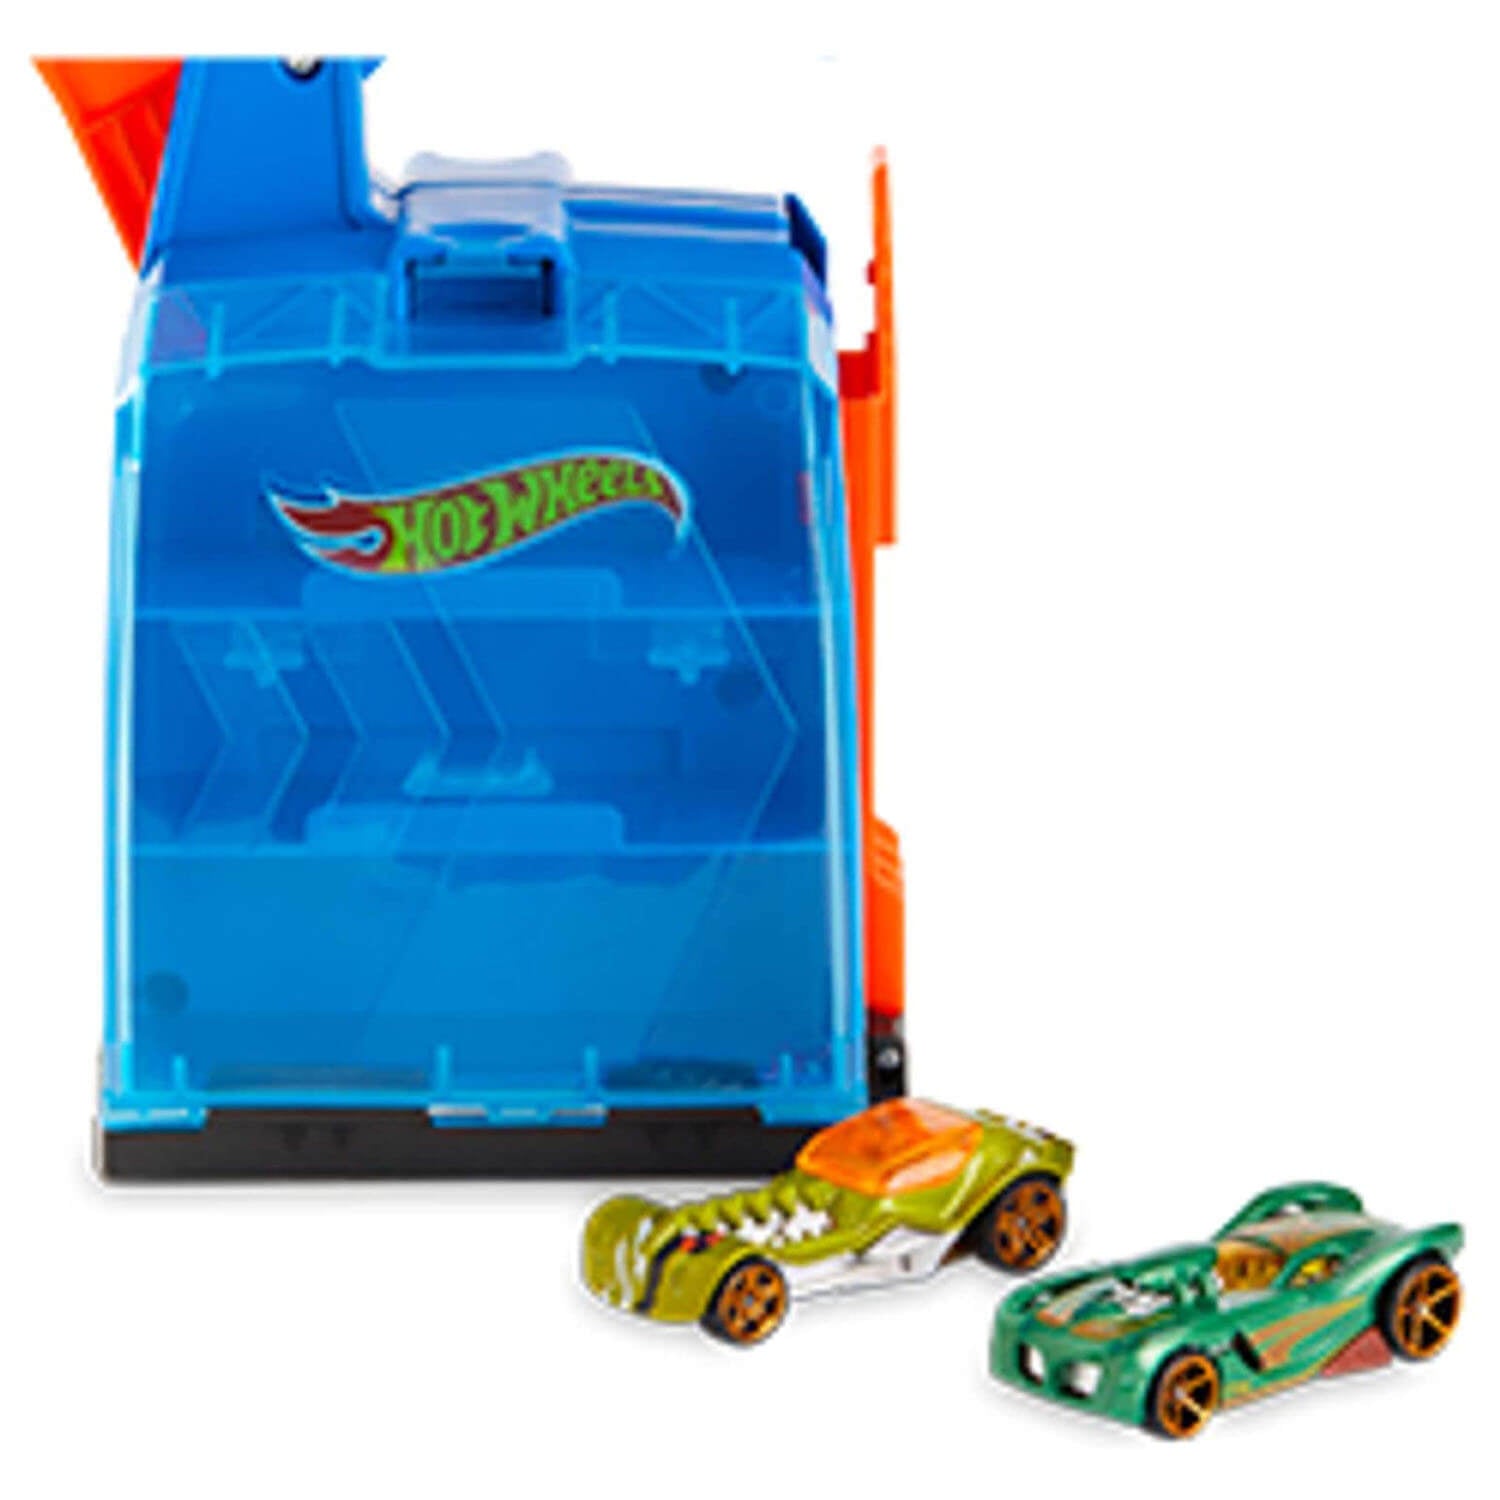 Front view of the hot wheels toy.